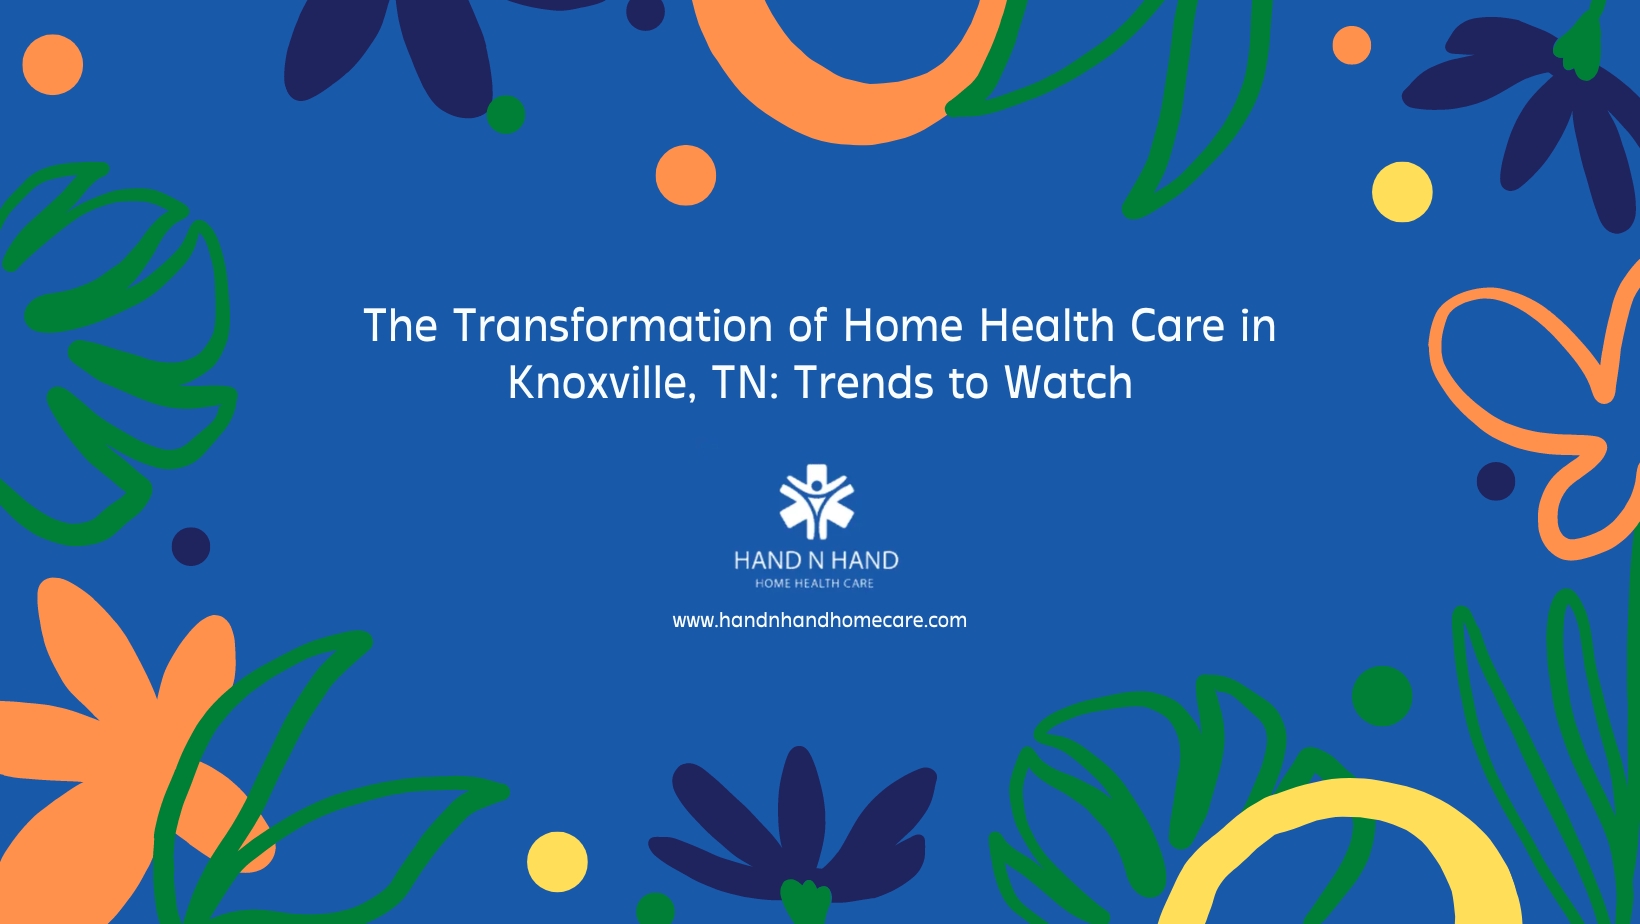 The Transformation of Home Health Care in Knoxville, TN- Trends to Watch